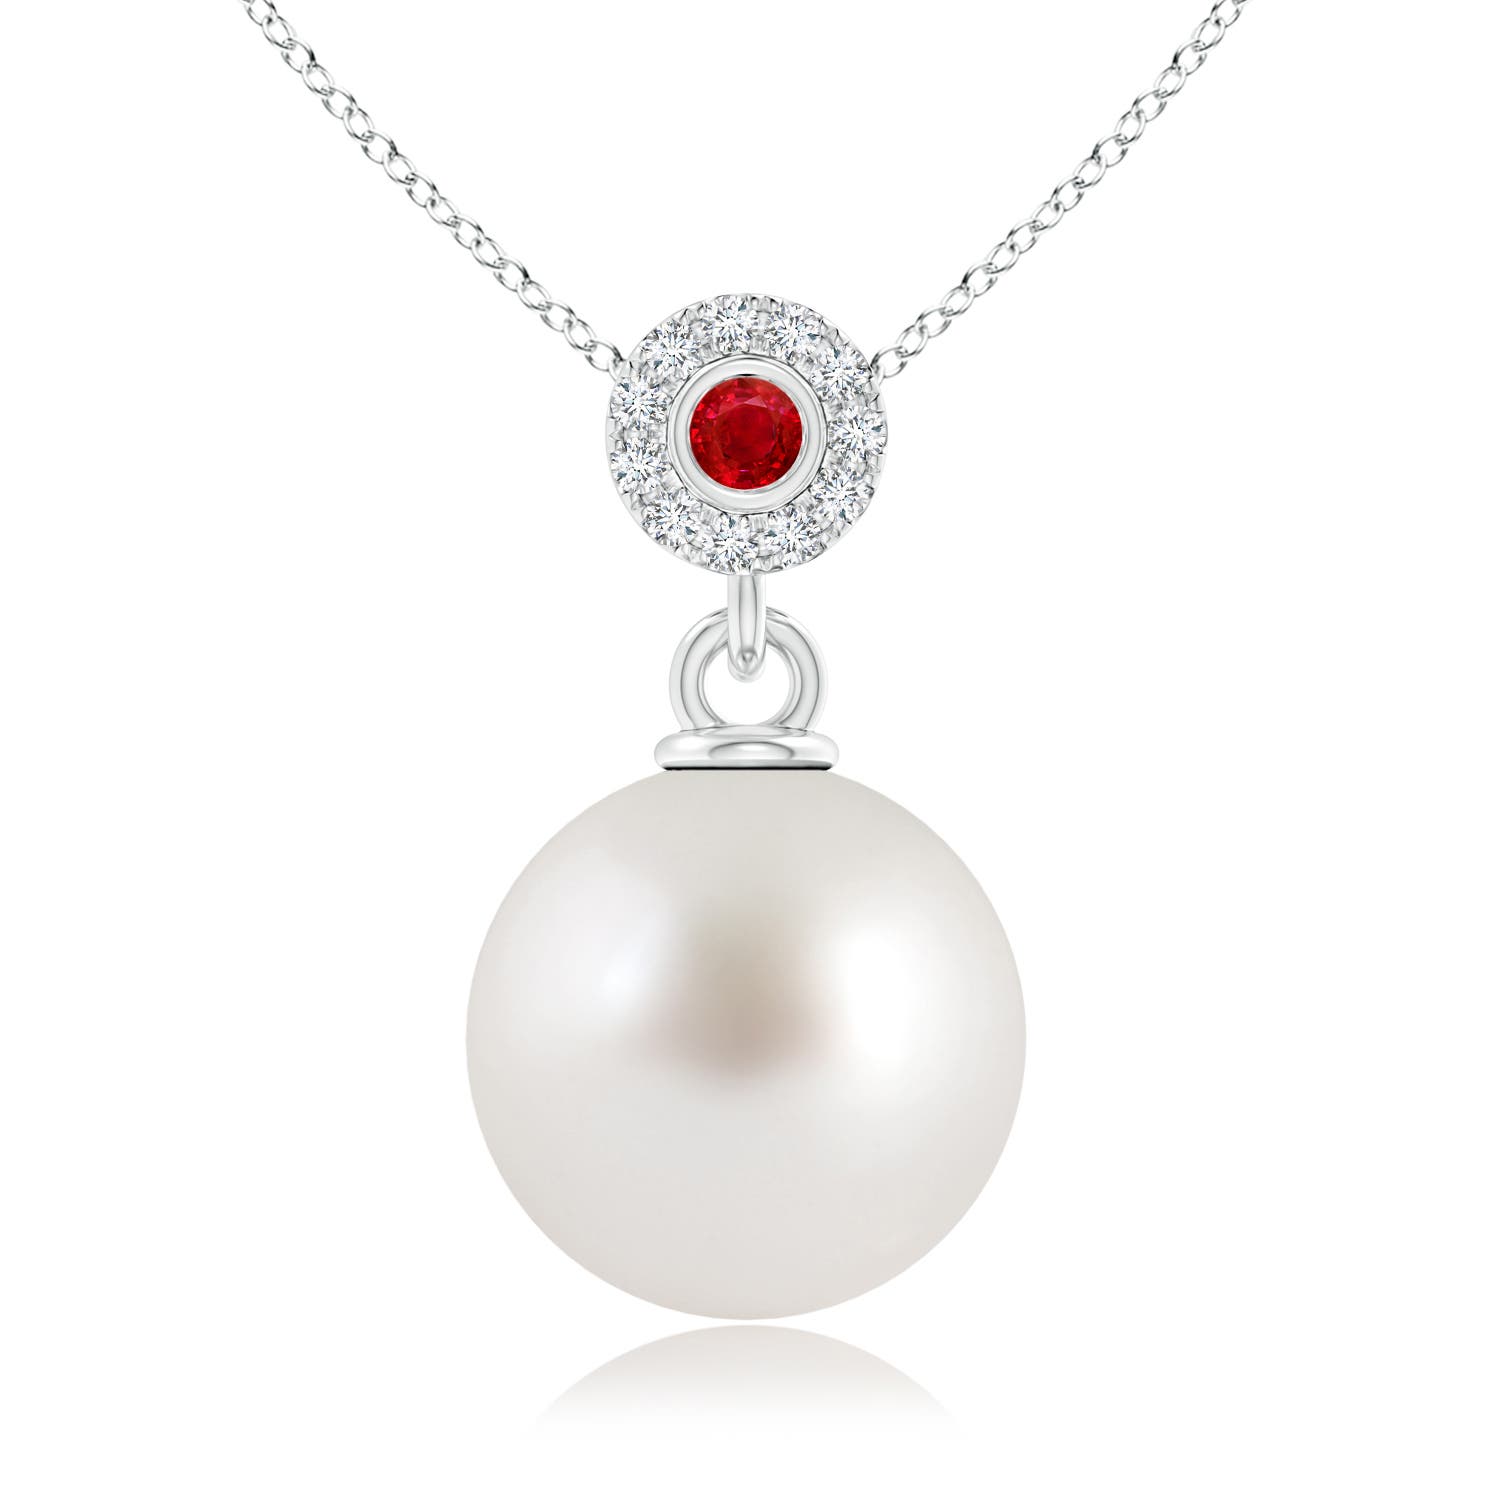 AAA - South Sea Cultured Pearl / 7.31 CT / 14 KT White Gold